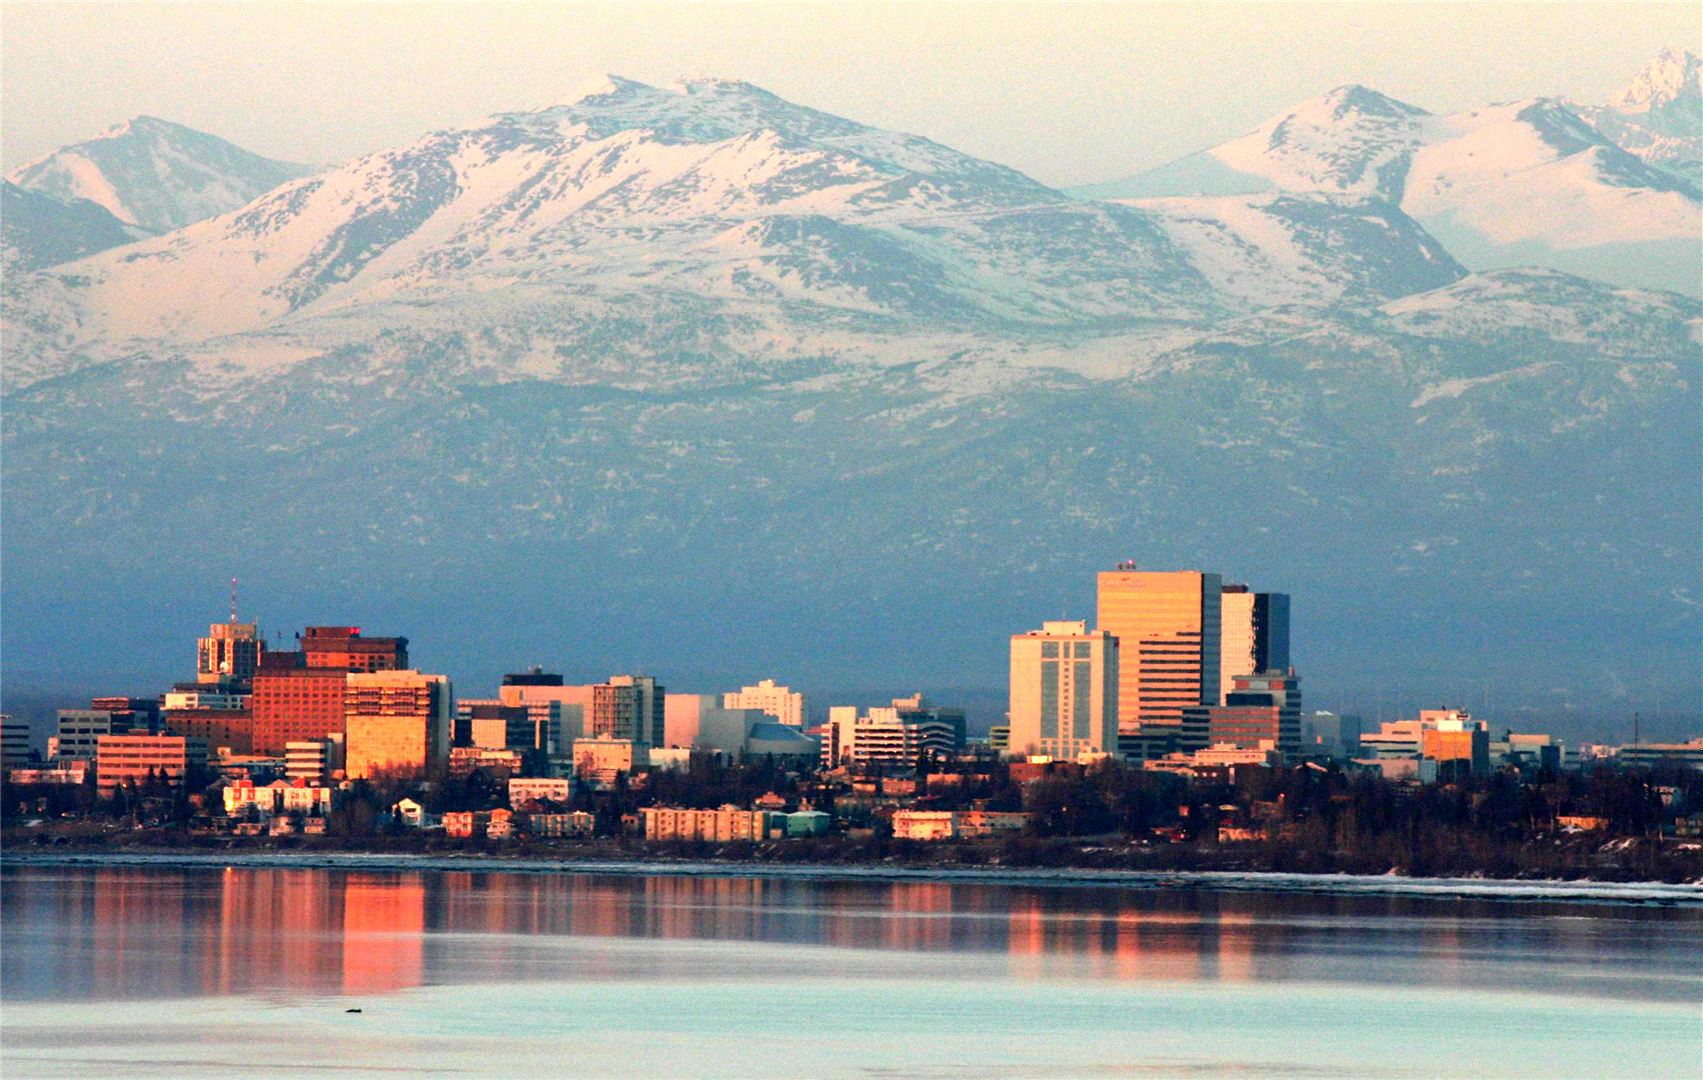 NACTA Heads to Anchorage for September’s Annual Conference